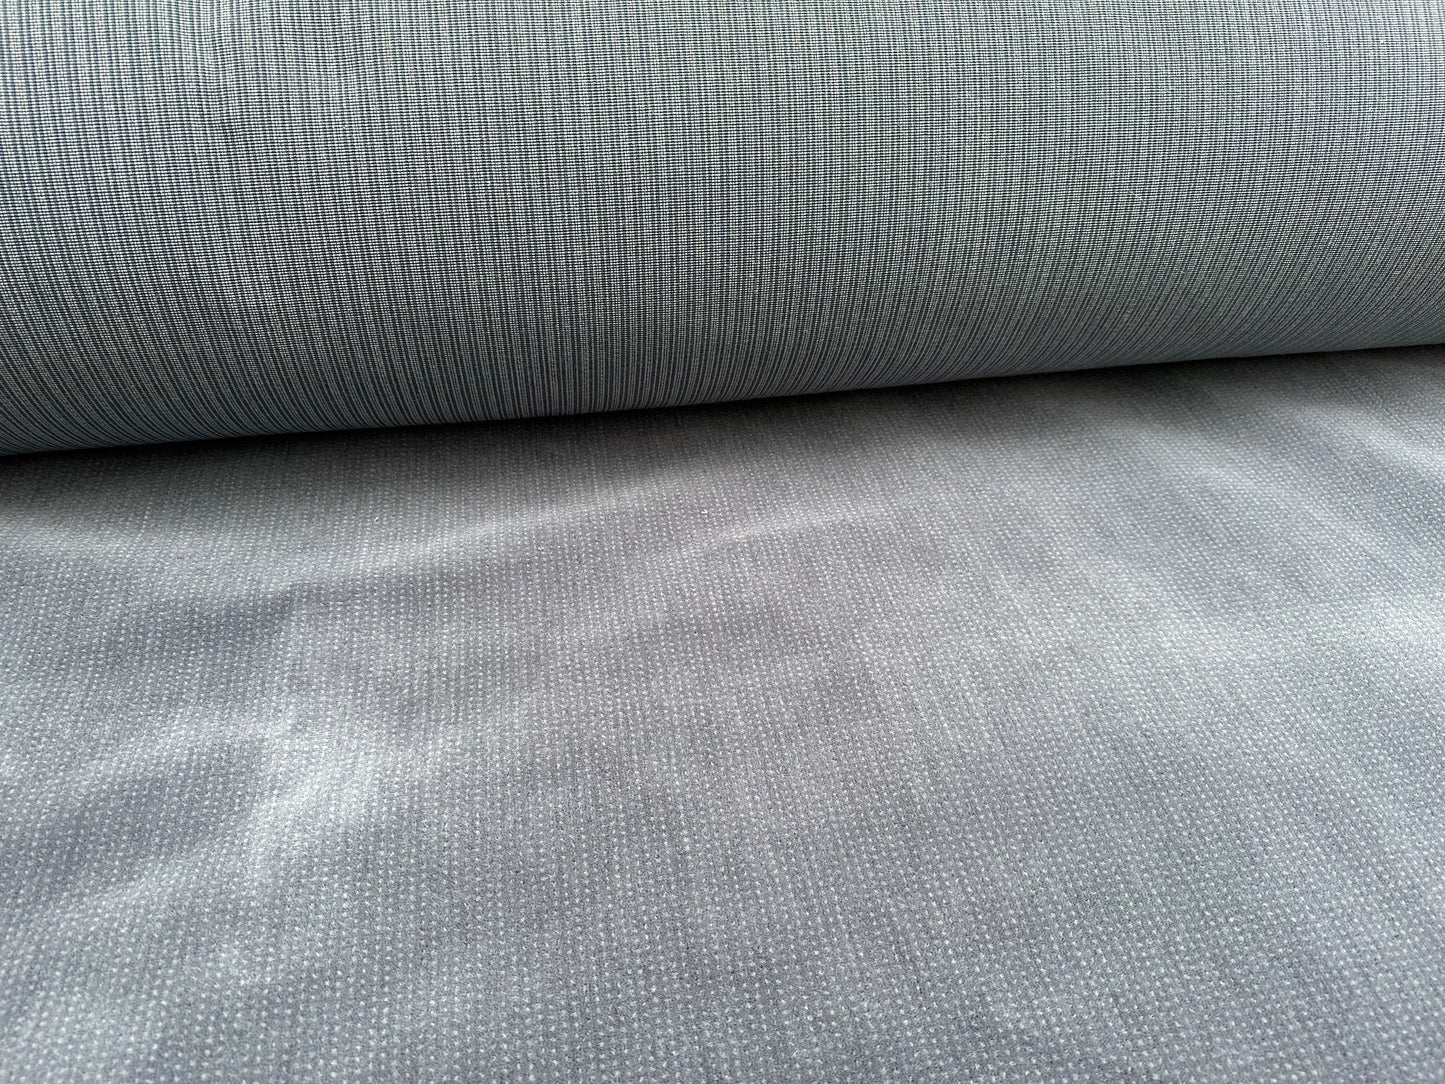 Grey Speckled Moquette